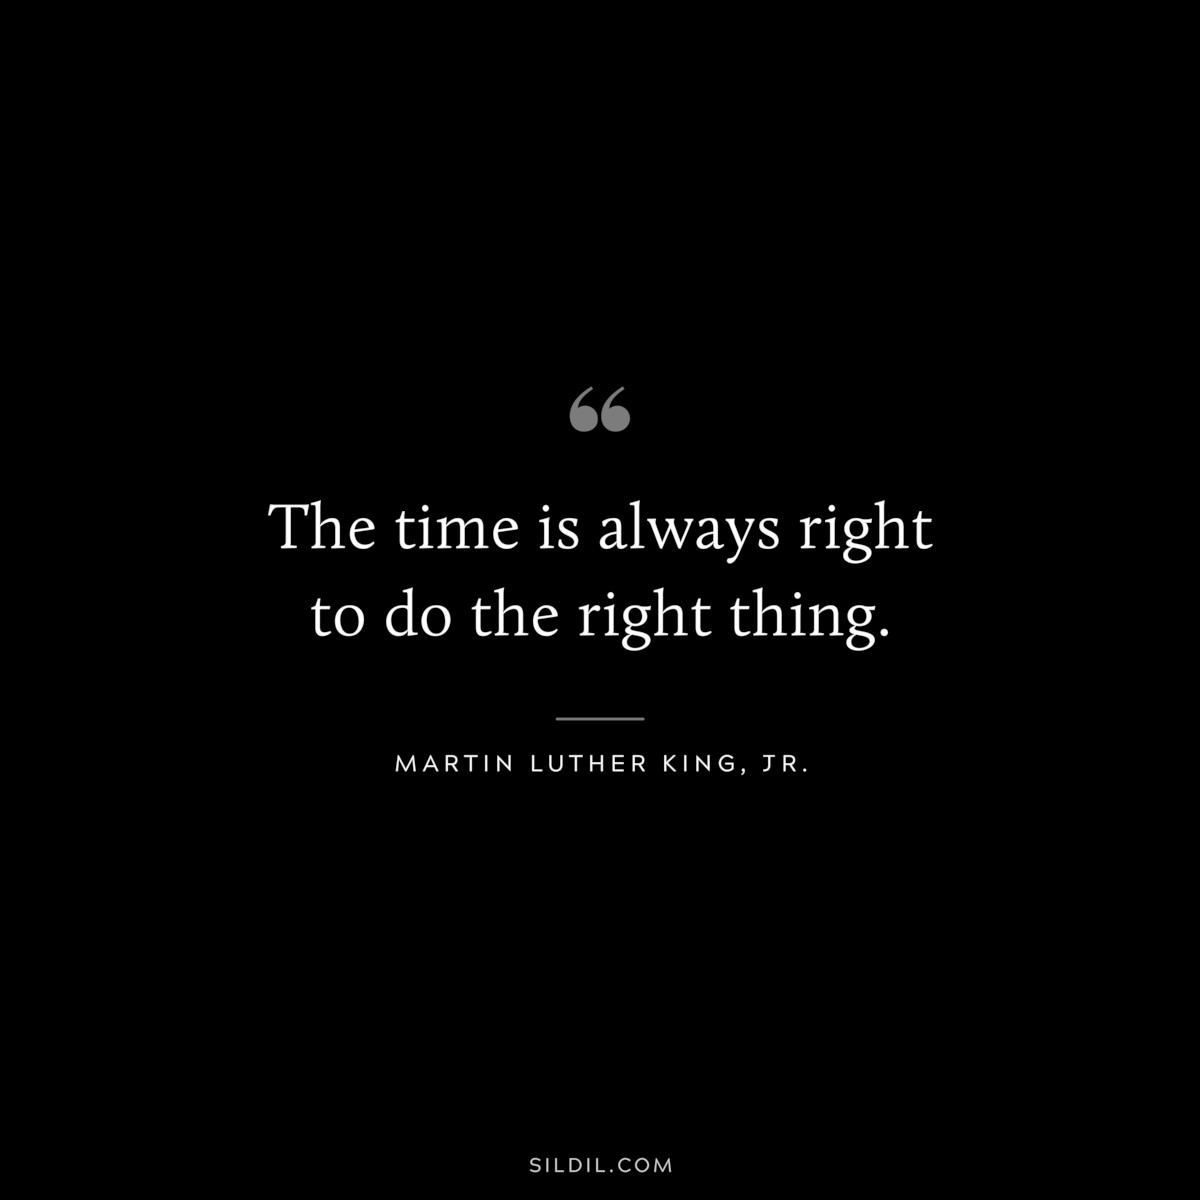 The time is always right to do the right thing. ― Martin Luther King, Jr.